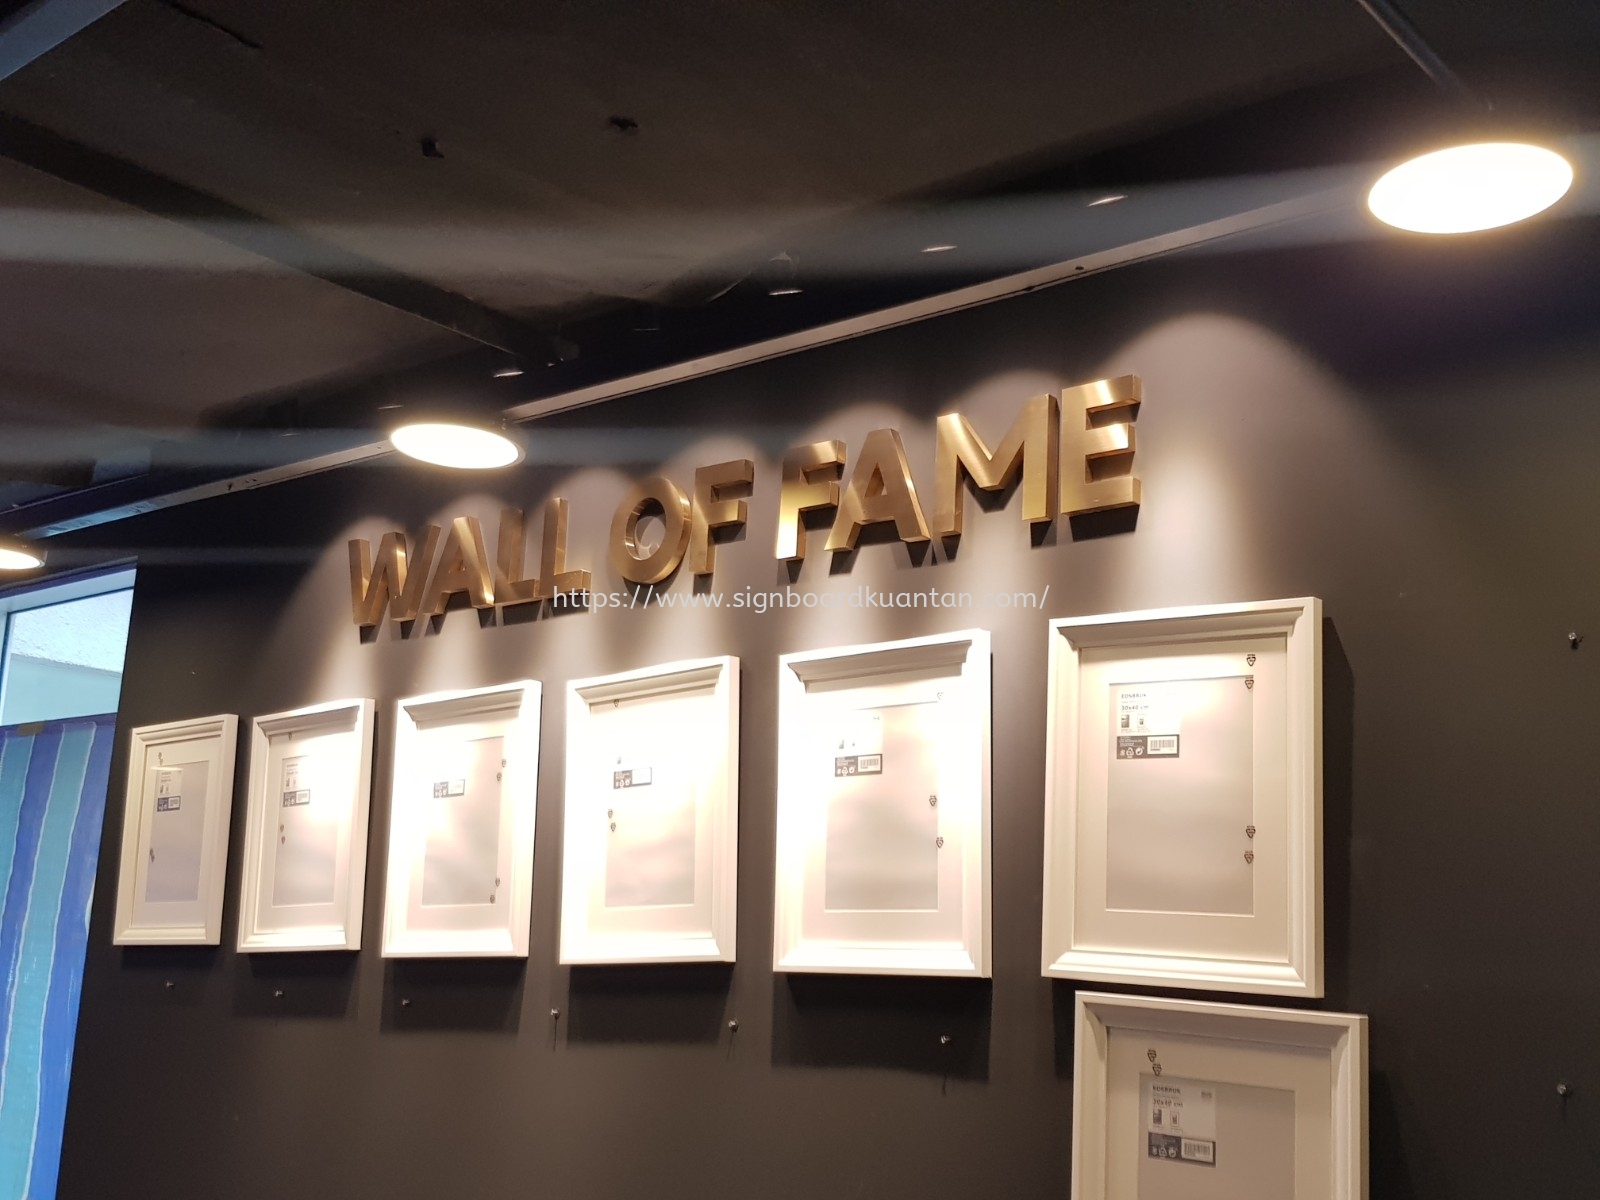 WALL OF FAME INDOOR 3D BOX UP STAINLESS STEEL LETTERING WITHOUT LED AT KEMAMAN  TERANGGANU